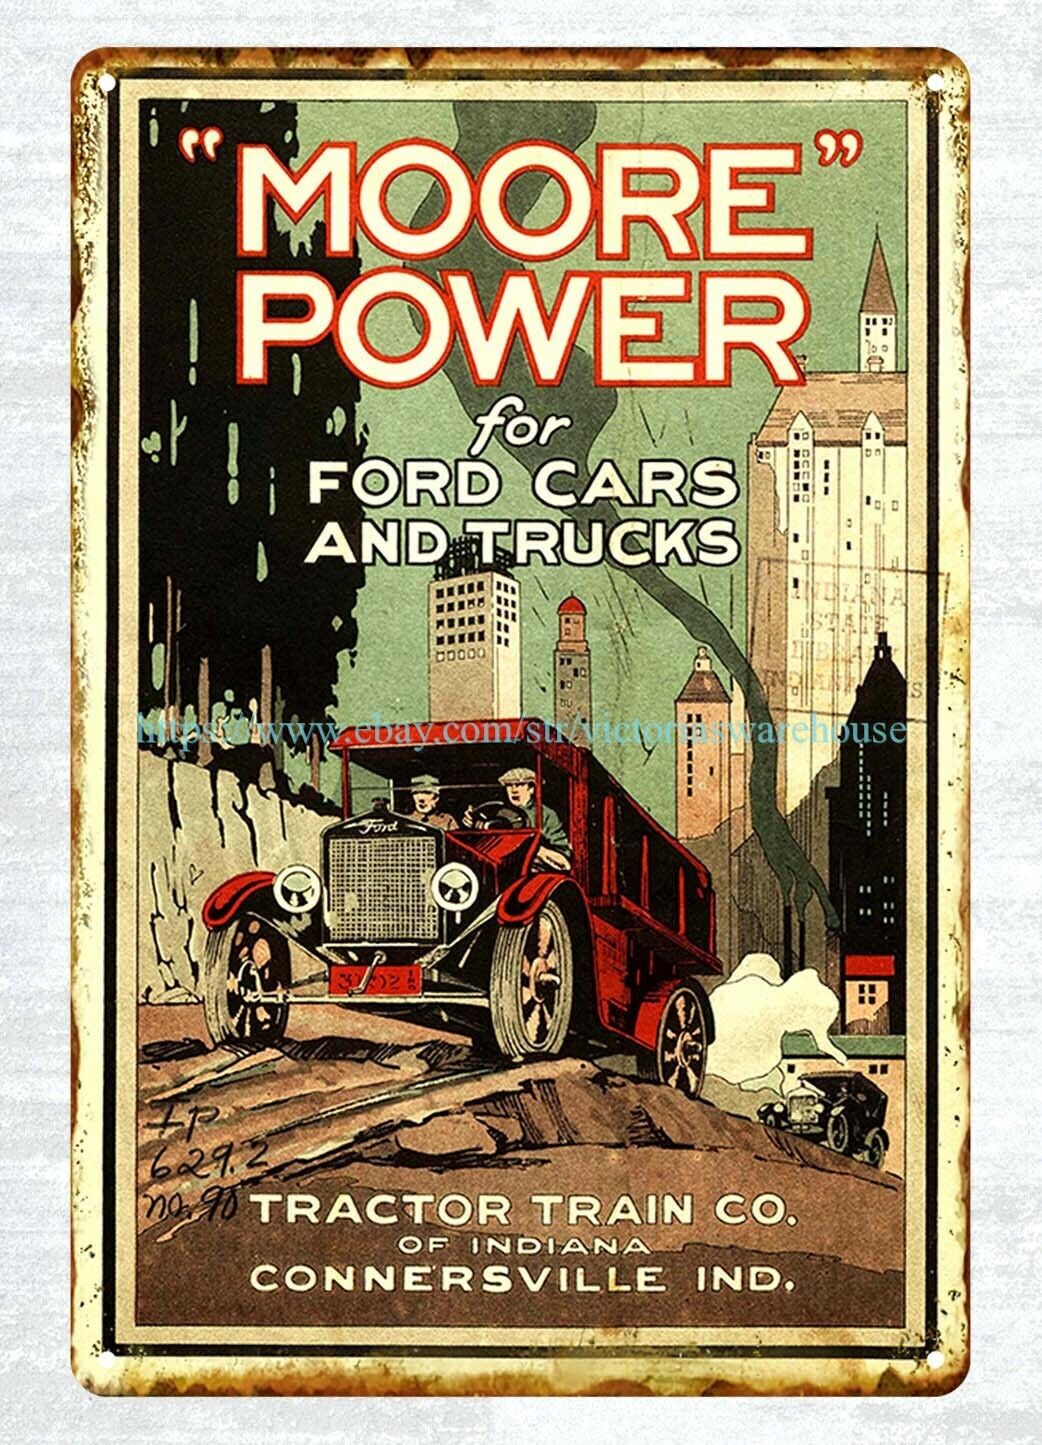 1910s Moore power Transmission for cars trucks Tractor Train Company